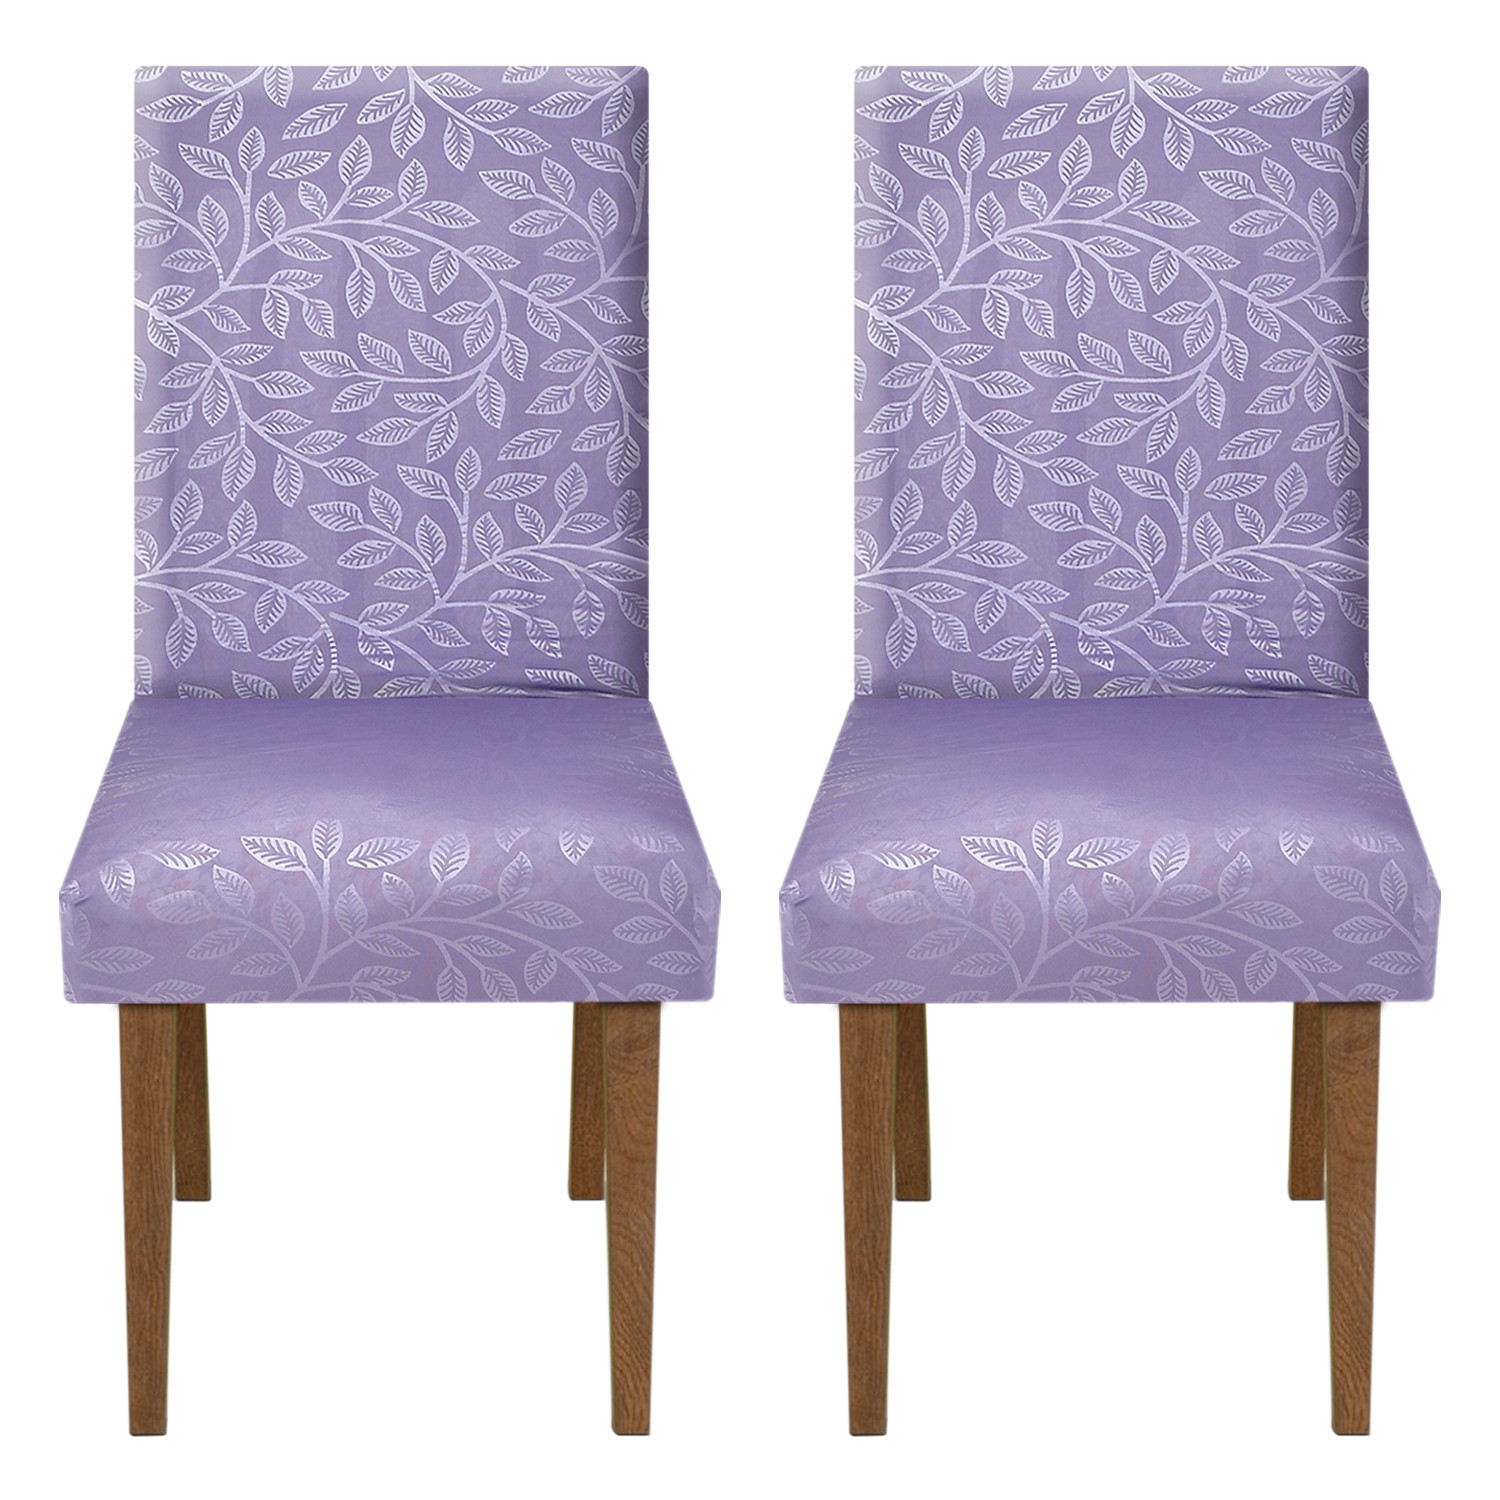 Kuber Industries Leaf Printed Elastic Stretchable Polyster Chair Cover For Home, Office, Hotels, Wedding Banquet (Purple)